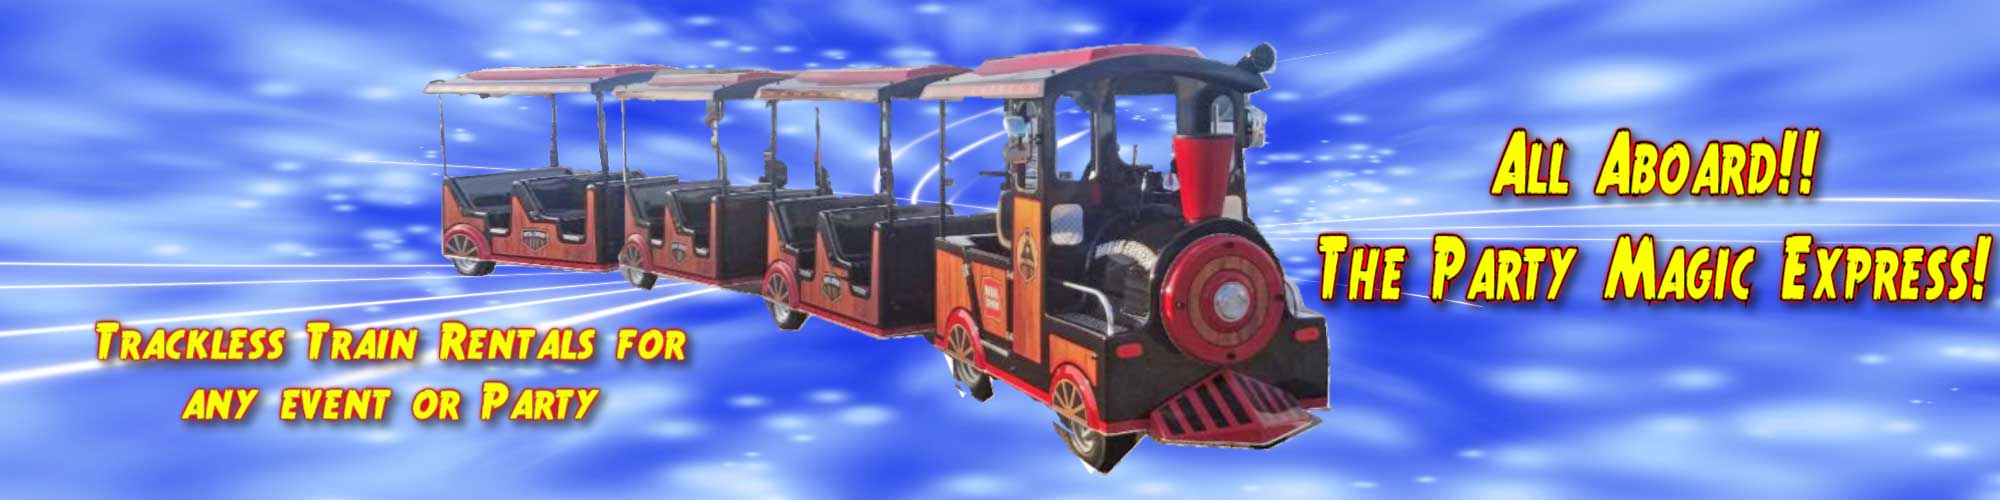 Trackless Train Rentals in Cleburne Tx